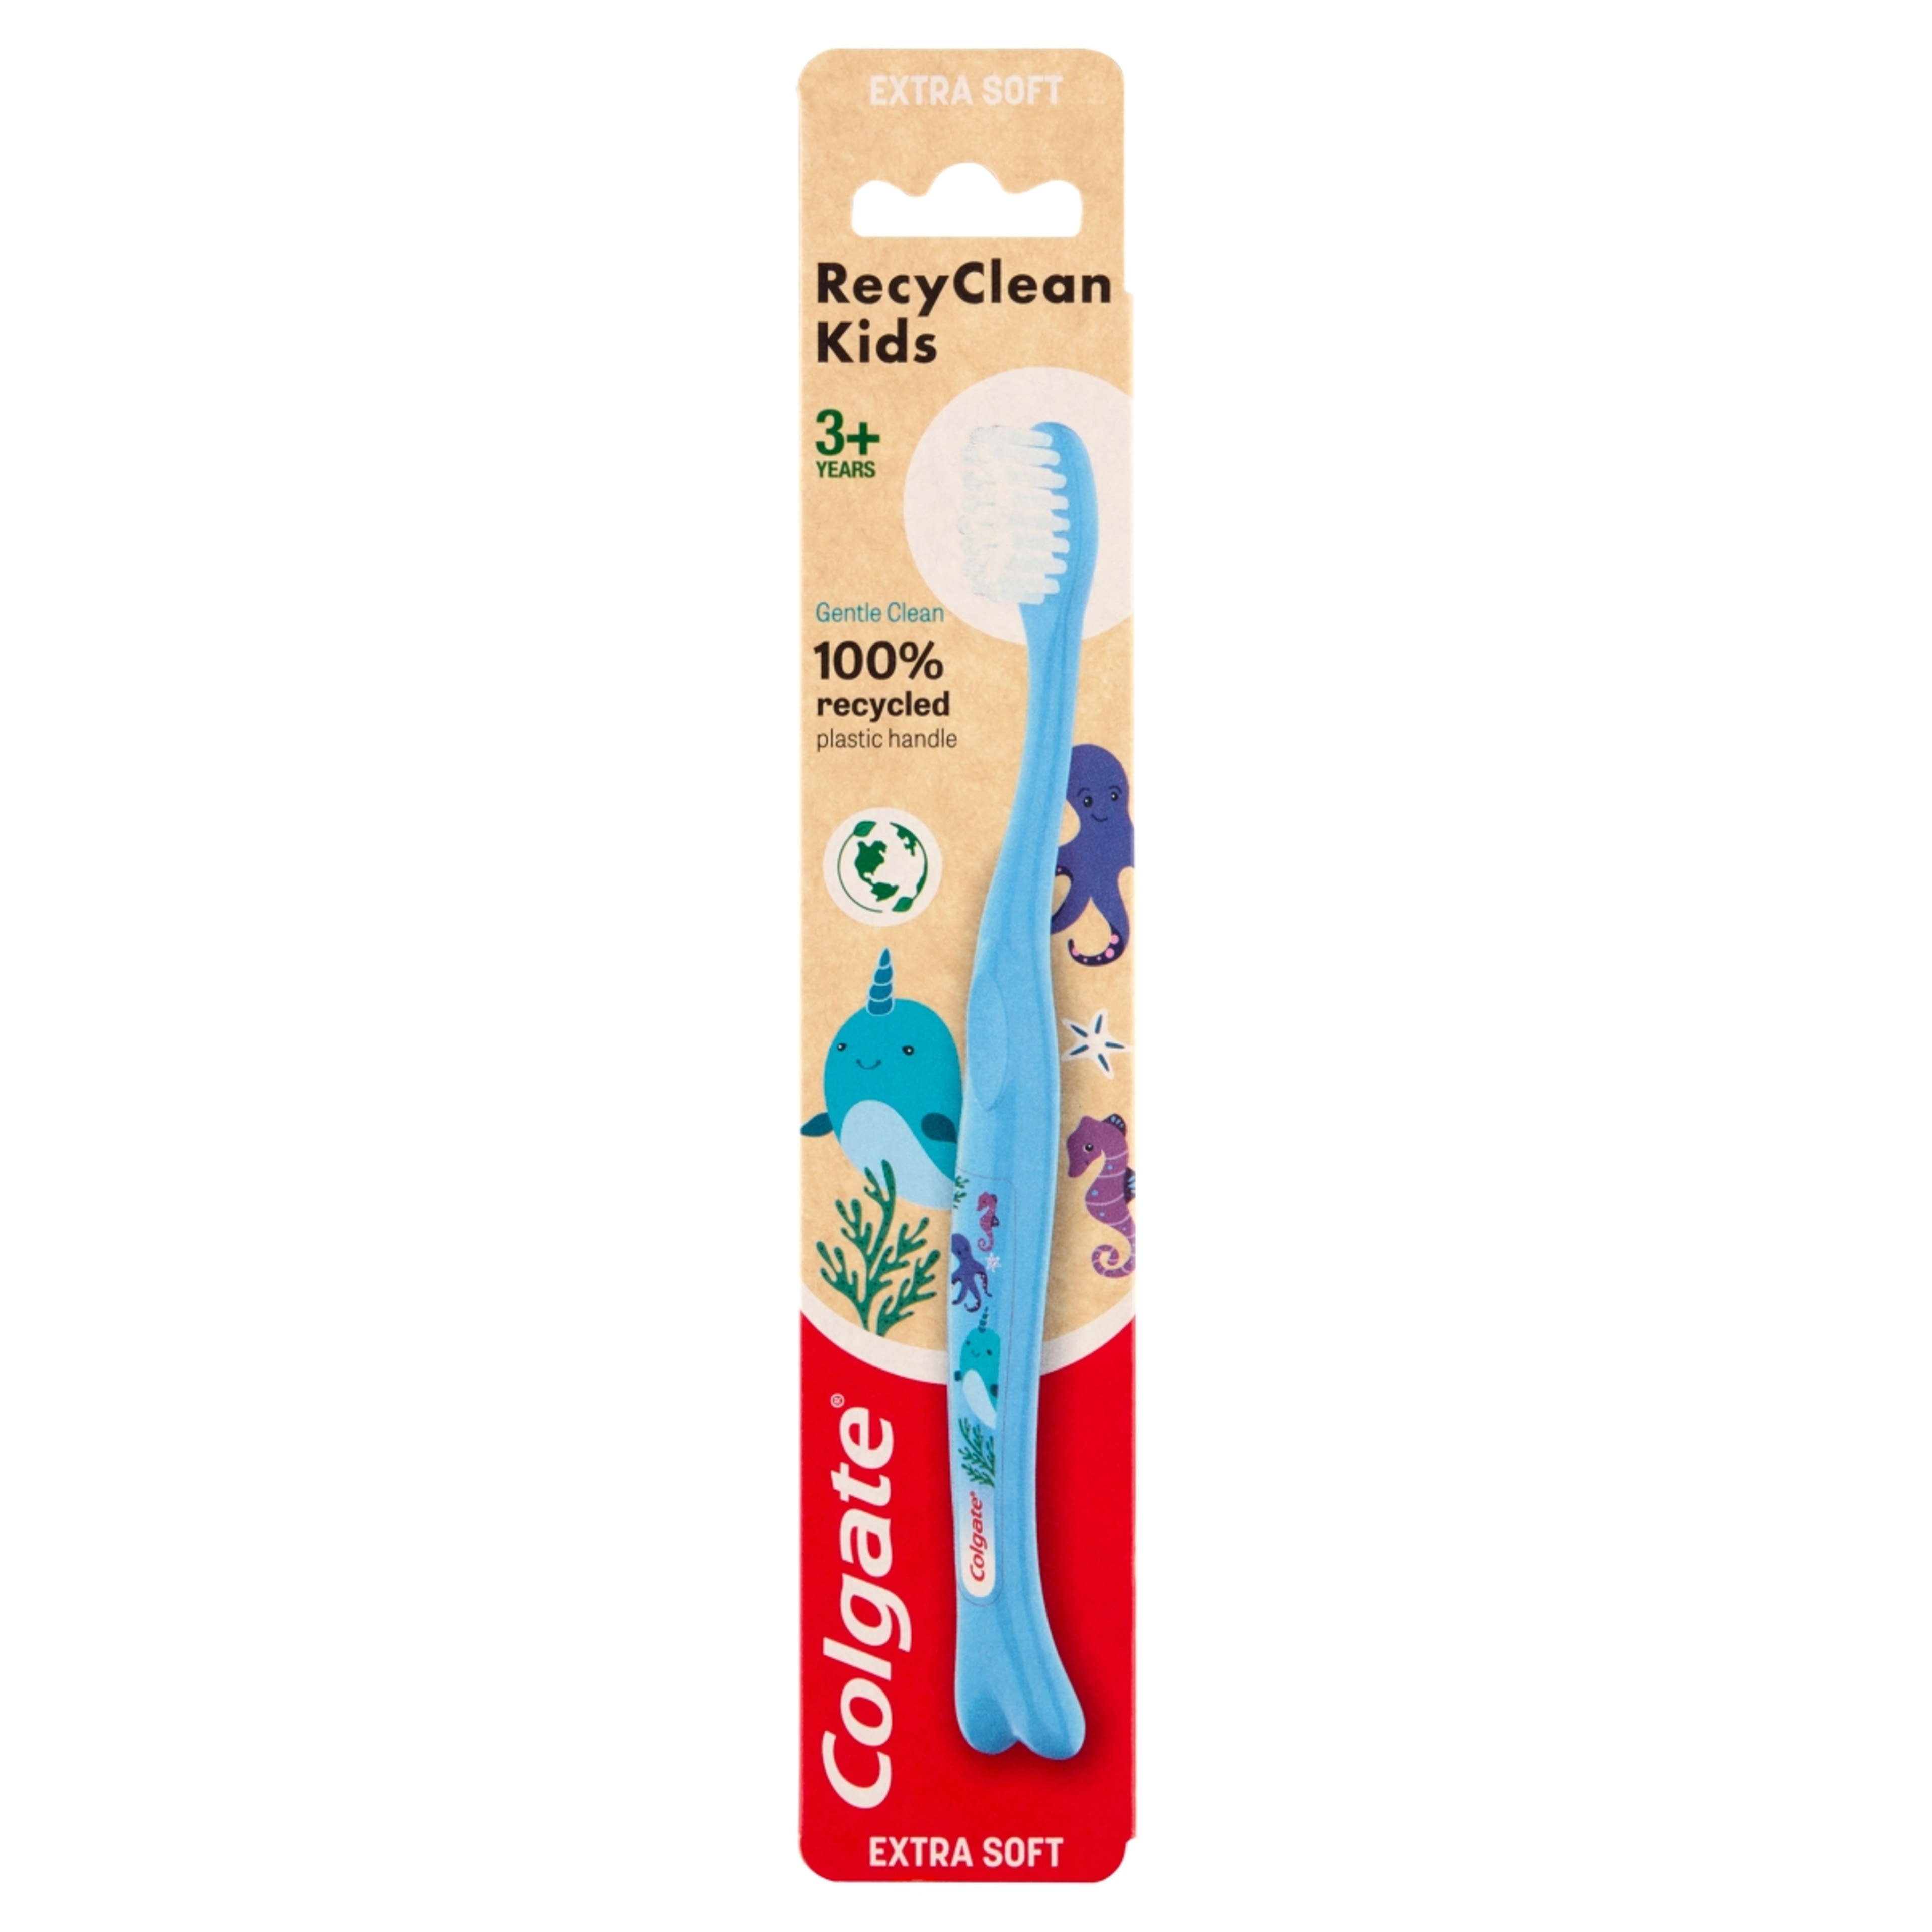 Colgate RecyClean Kids Extra Soft fogkefe - 1 db